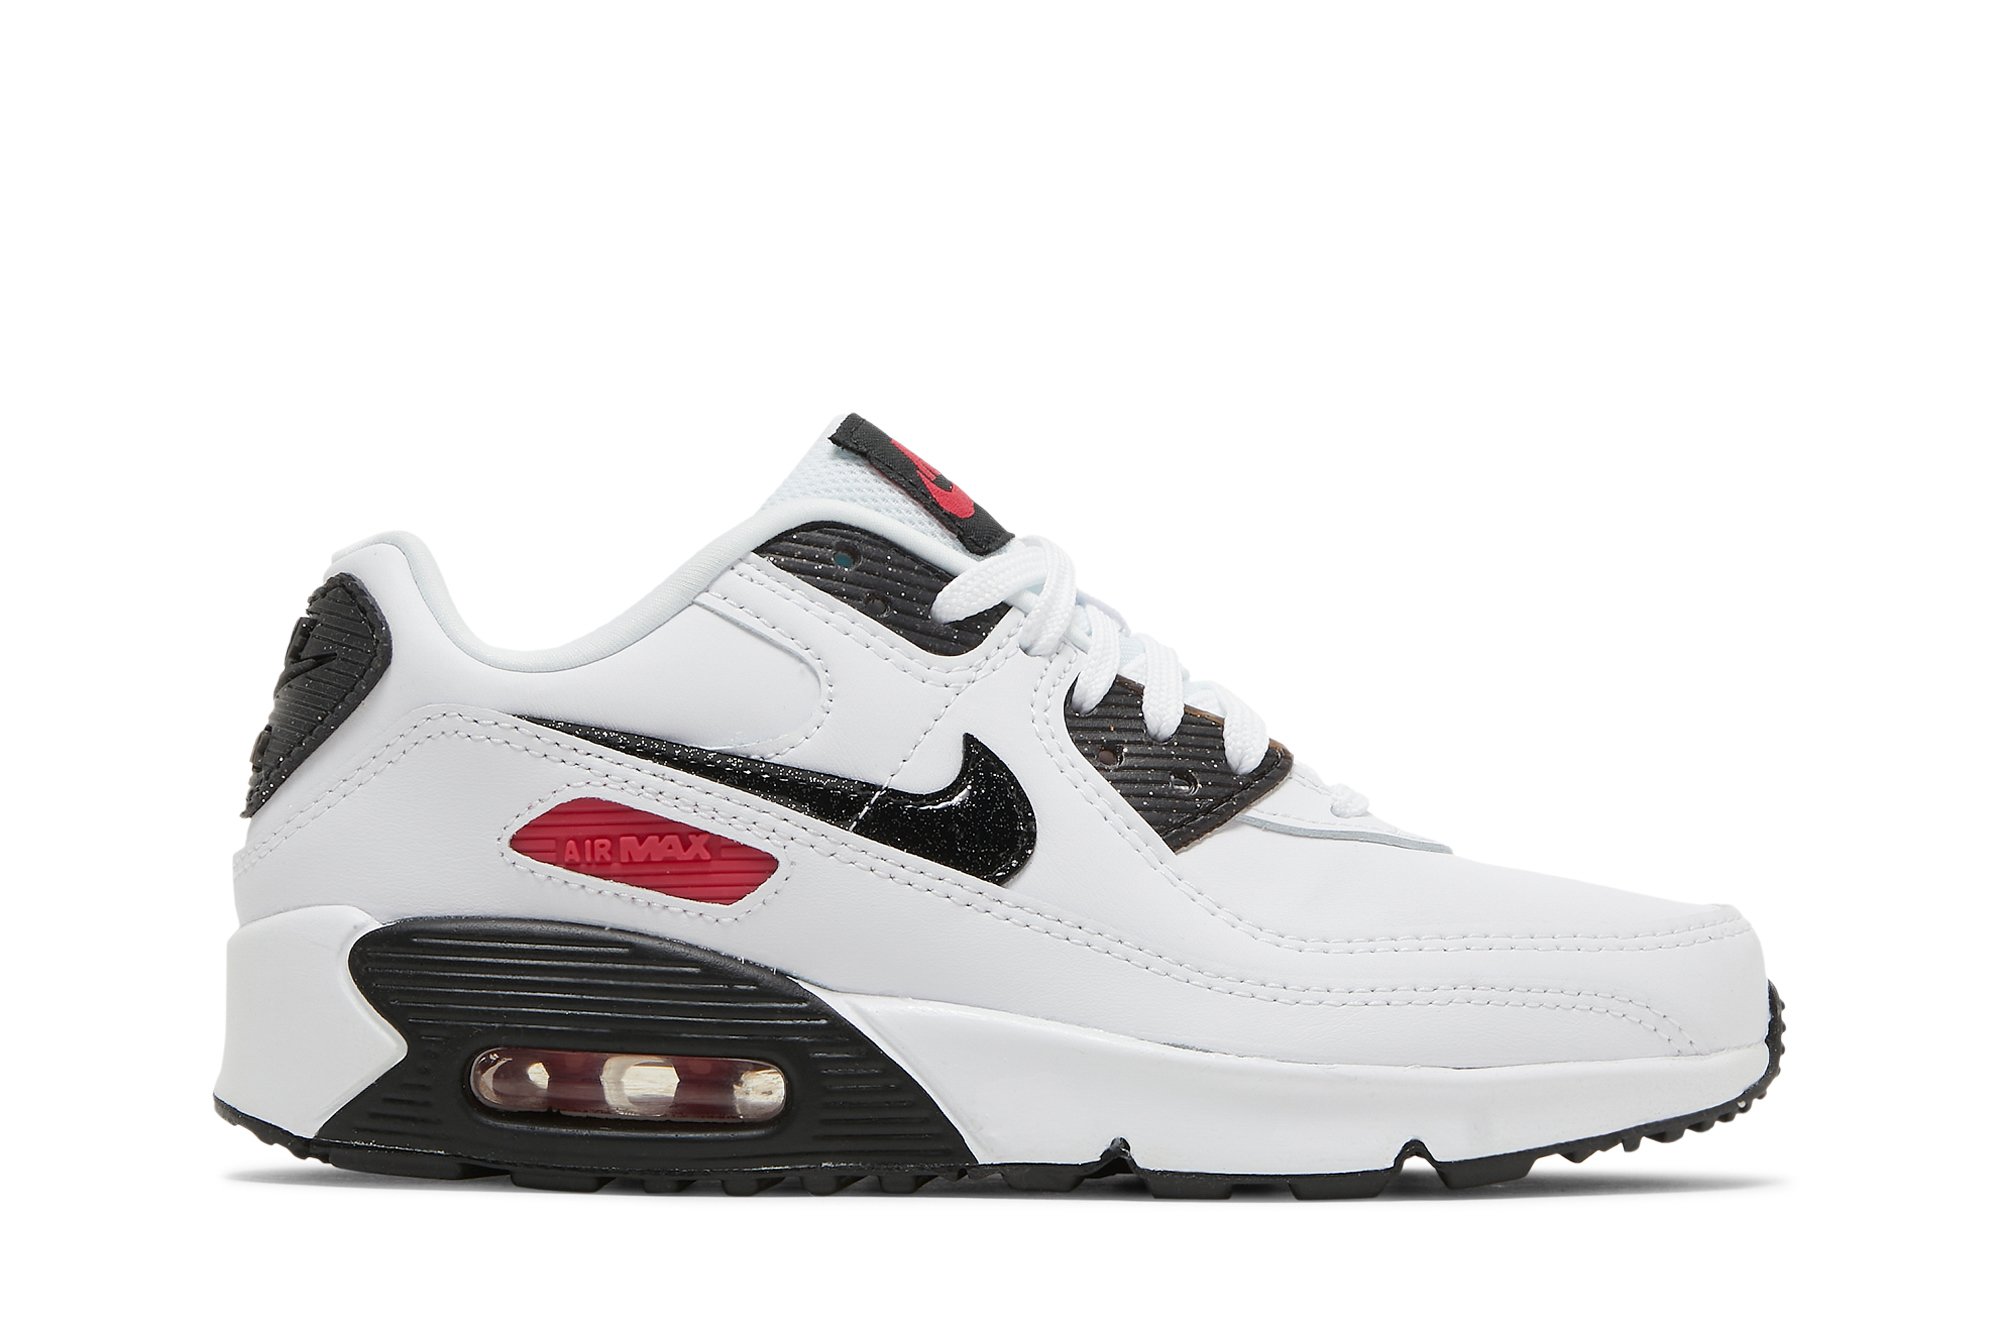 Buy Air Max 90 Leather SE GS 'White Very Berry' - DH2605 100 | GOAT